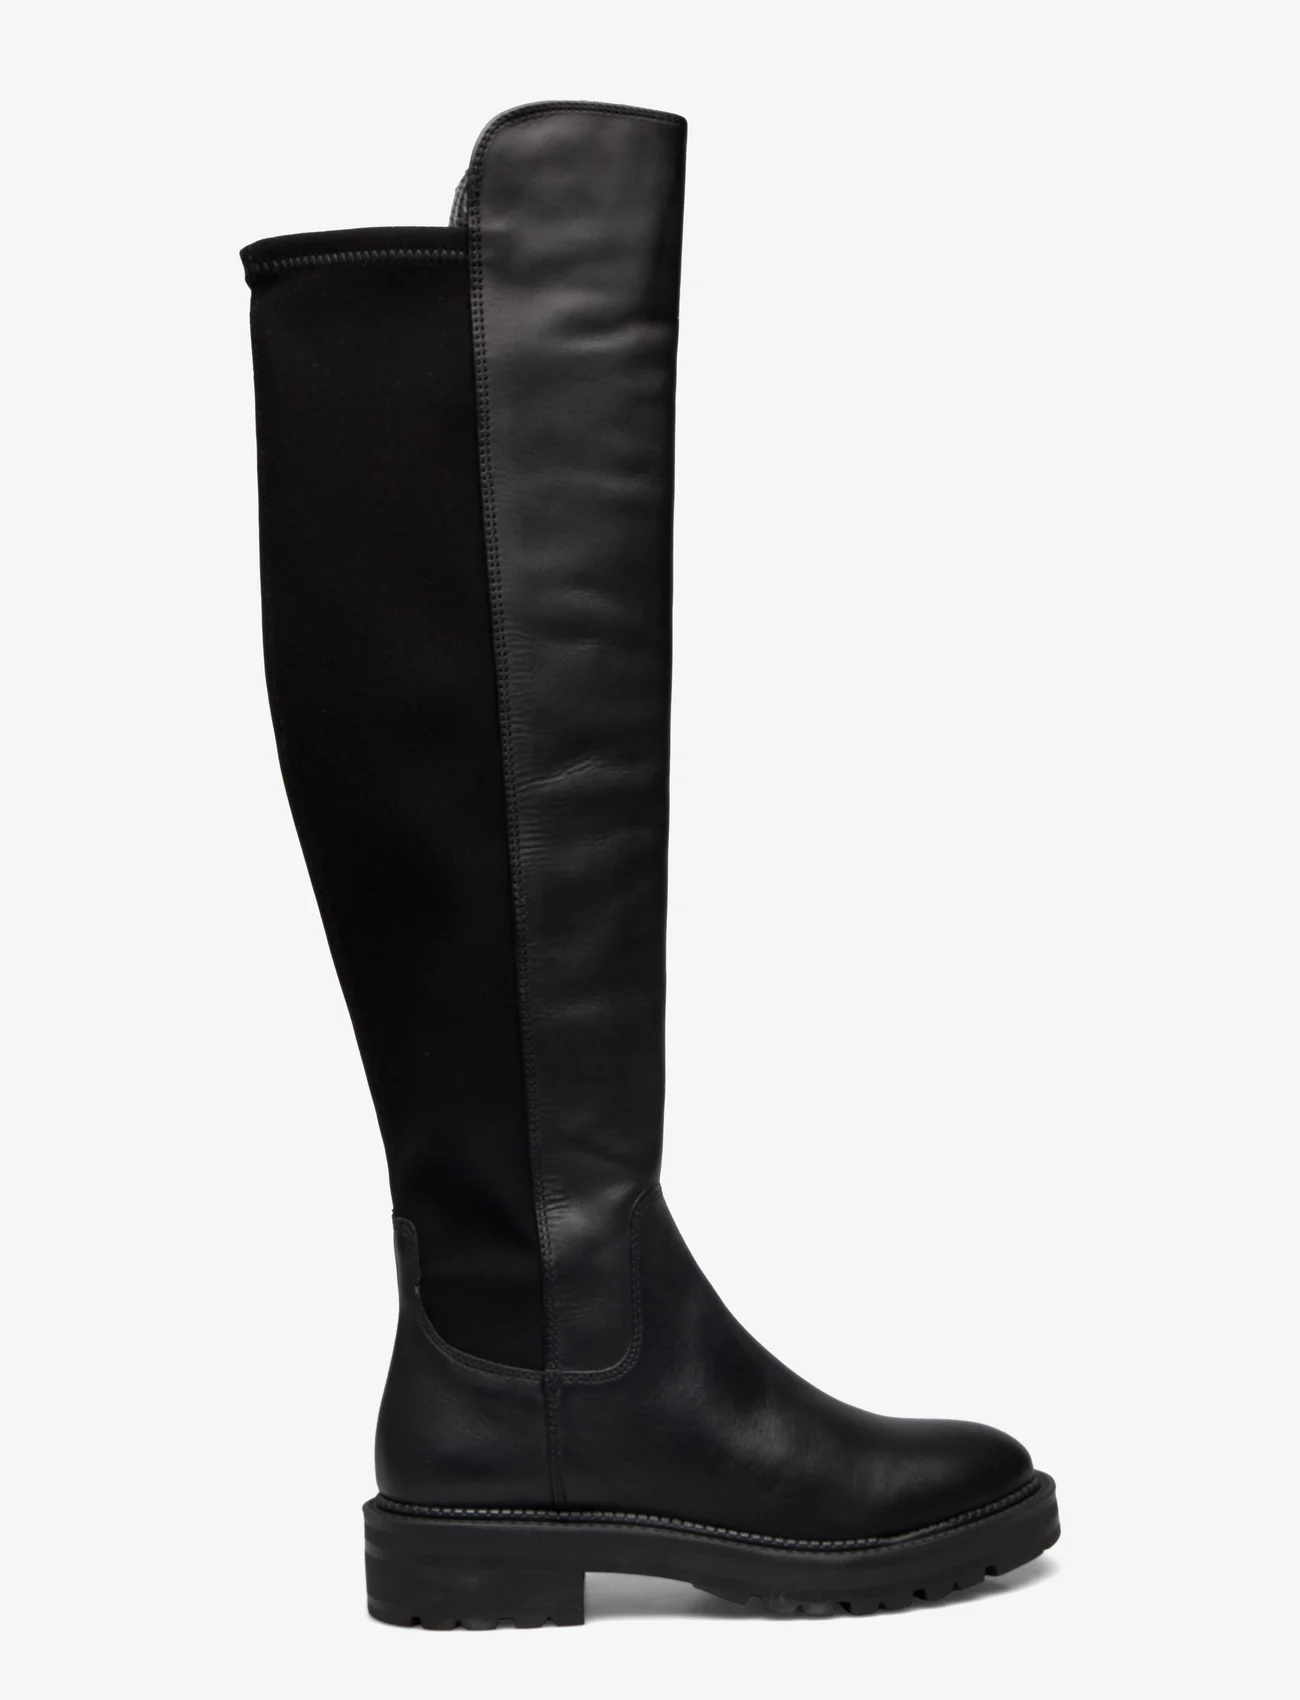 Dune London - tella - over-the-knee boots - black - 1